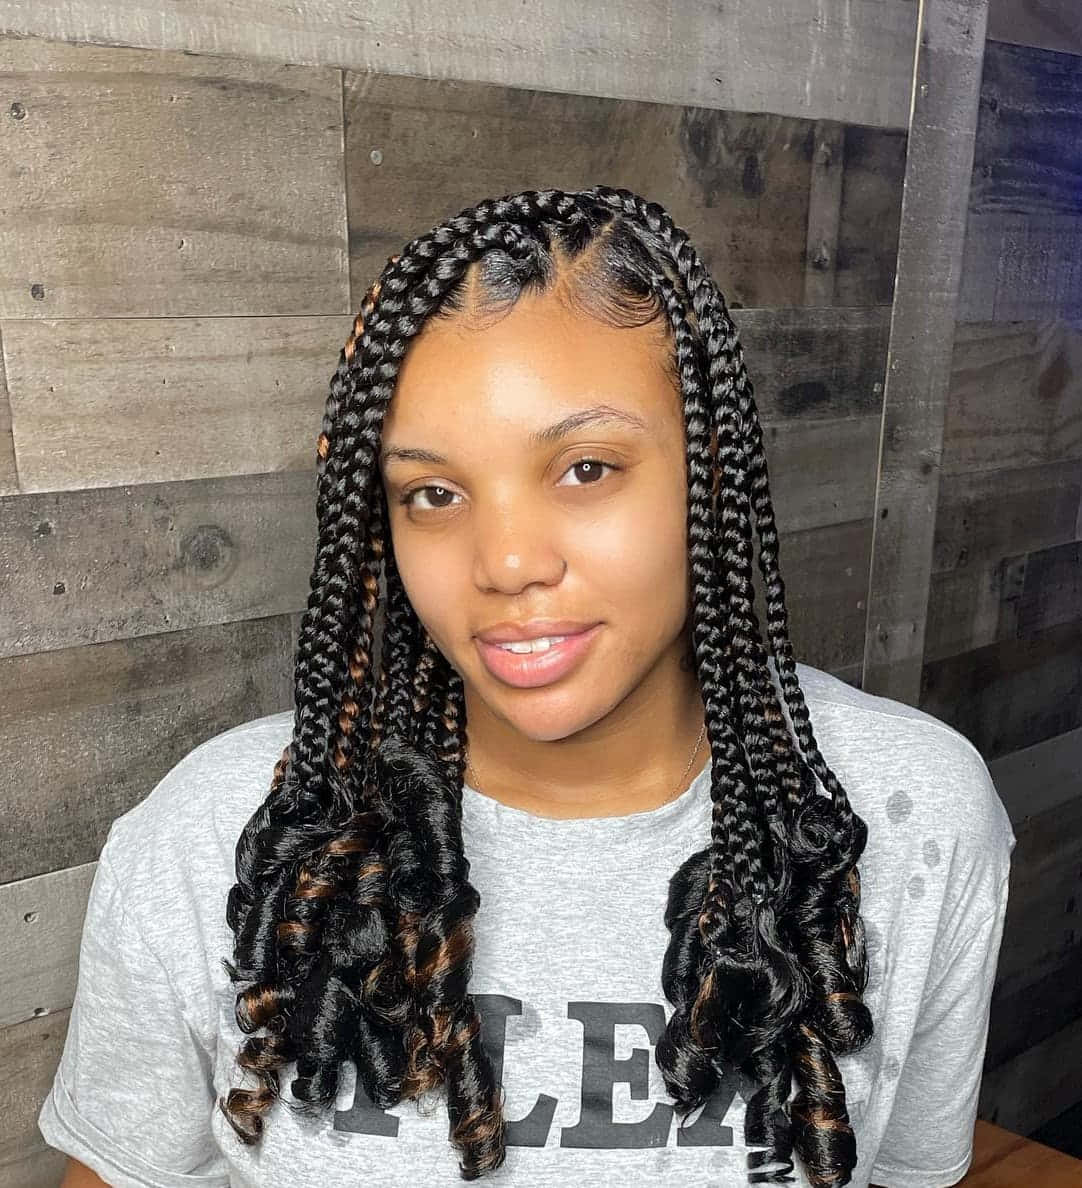 Download Captivating Braids Hairstyles 2022 Inspiration | Wallpapers.com